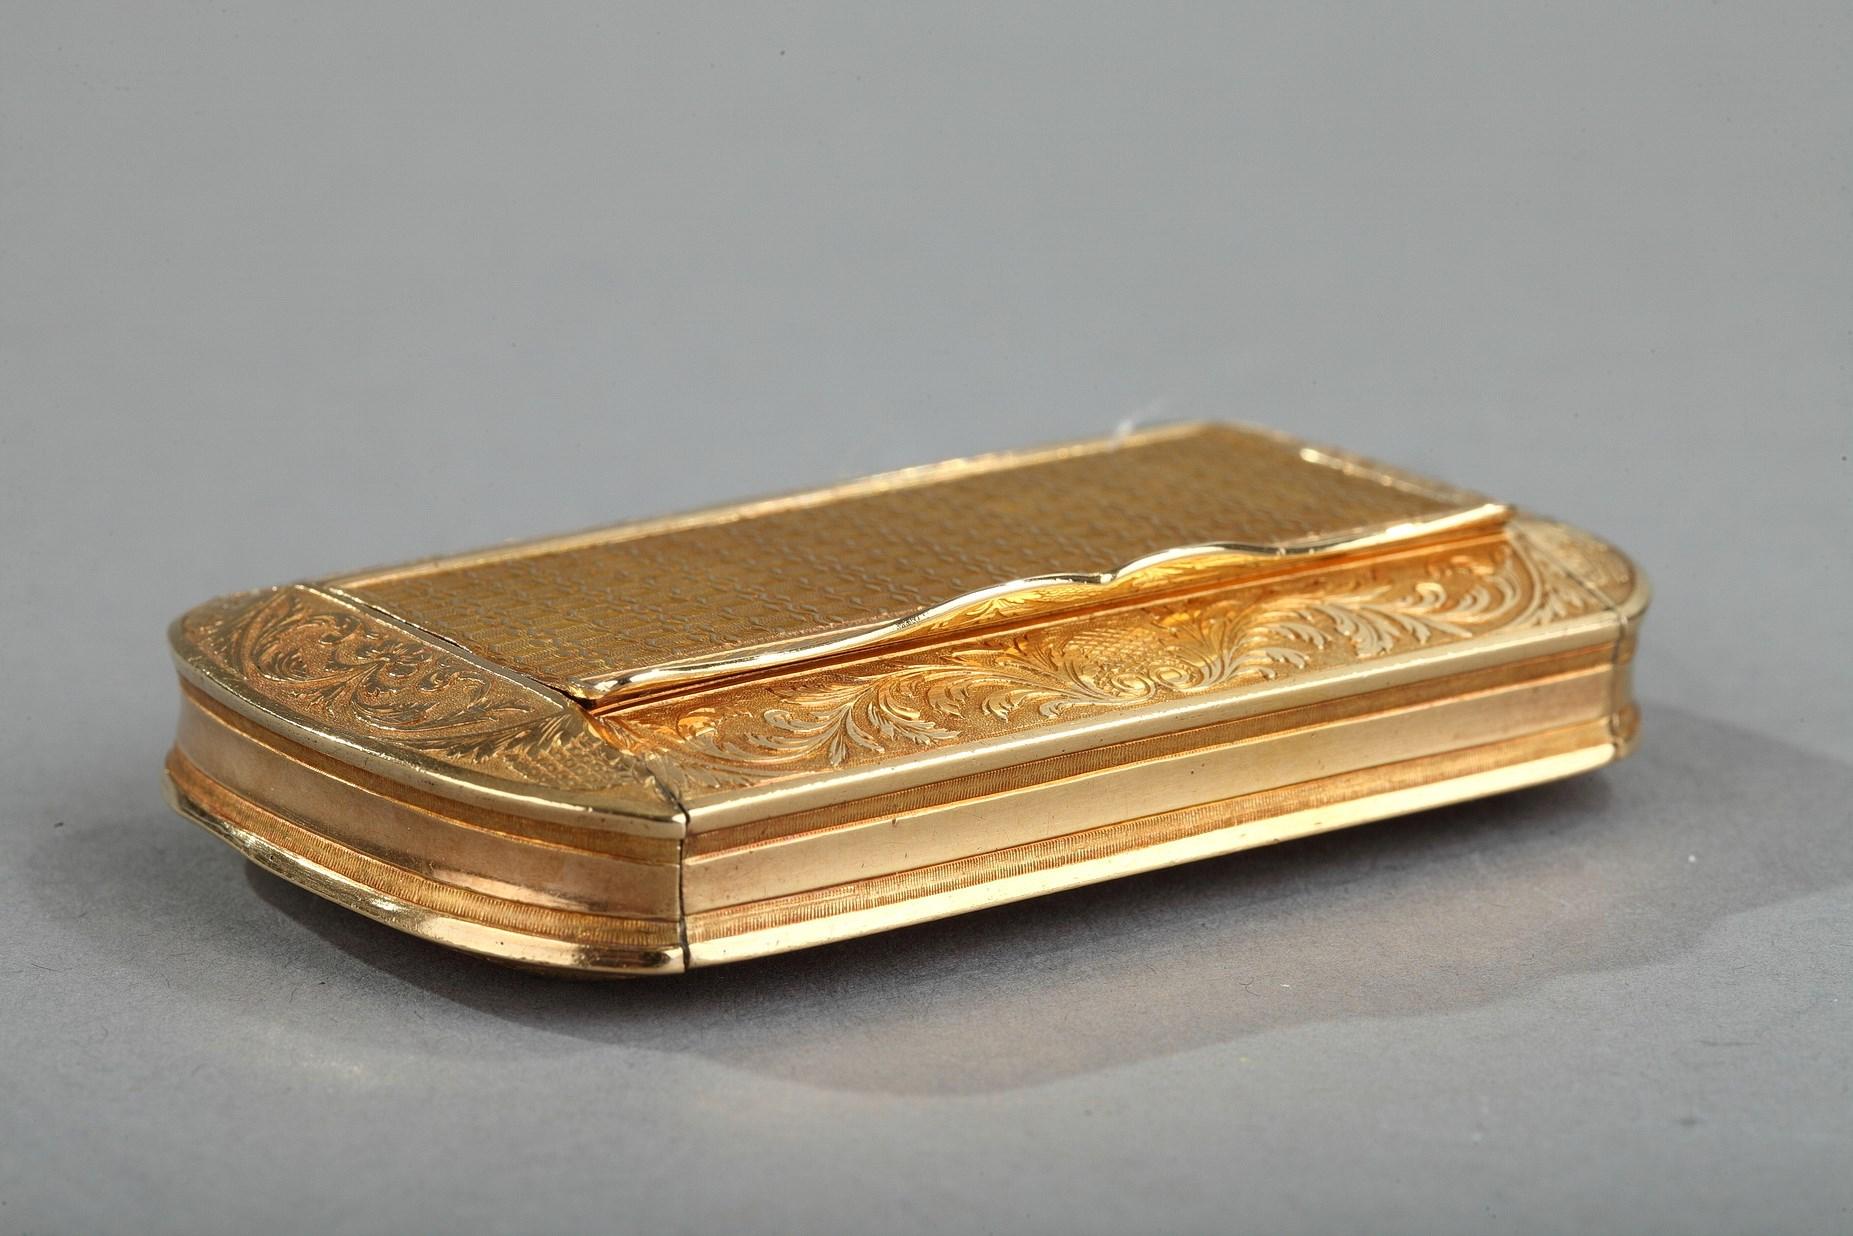 Rectangular box with rounded corners. The hinged lid as well as the bottom are embellished with an intricate geometric pattern framed with rinceaux motifs on a matte gold background. A button serves to open the box.
Weight: 1.8 oz (52 g)
Measures: L